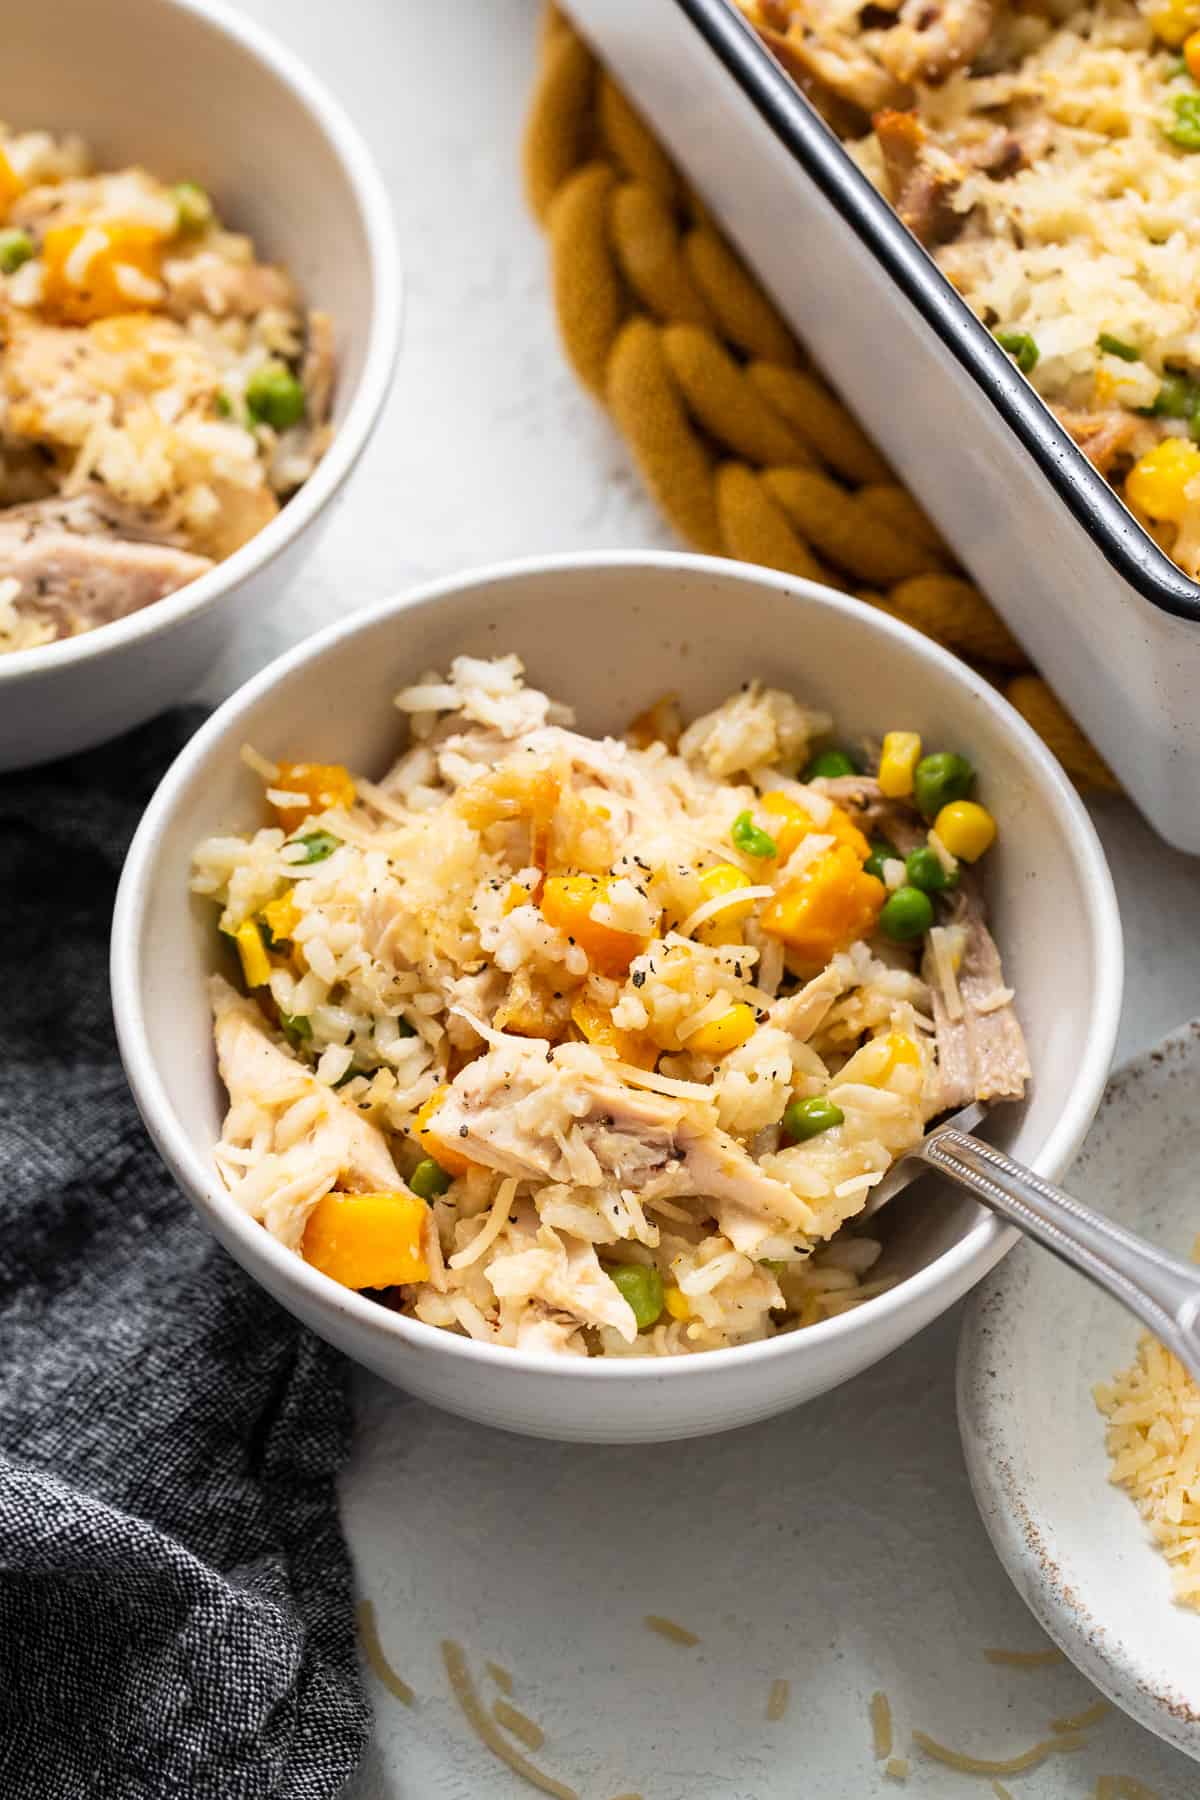 Turkey casserole in a bowl with a spoon.